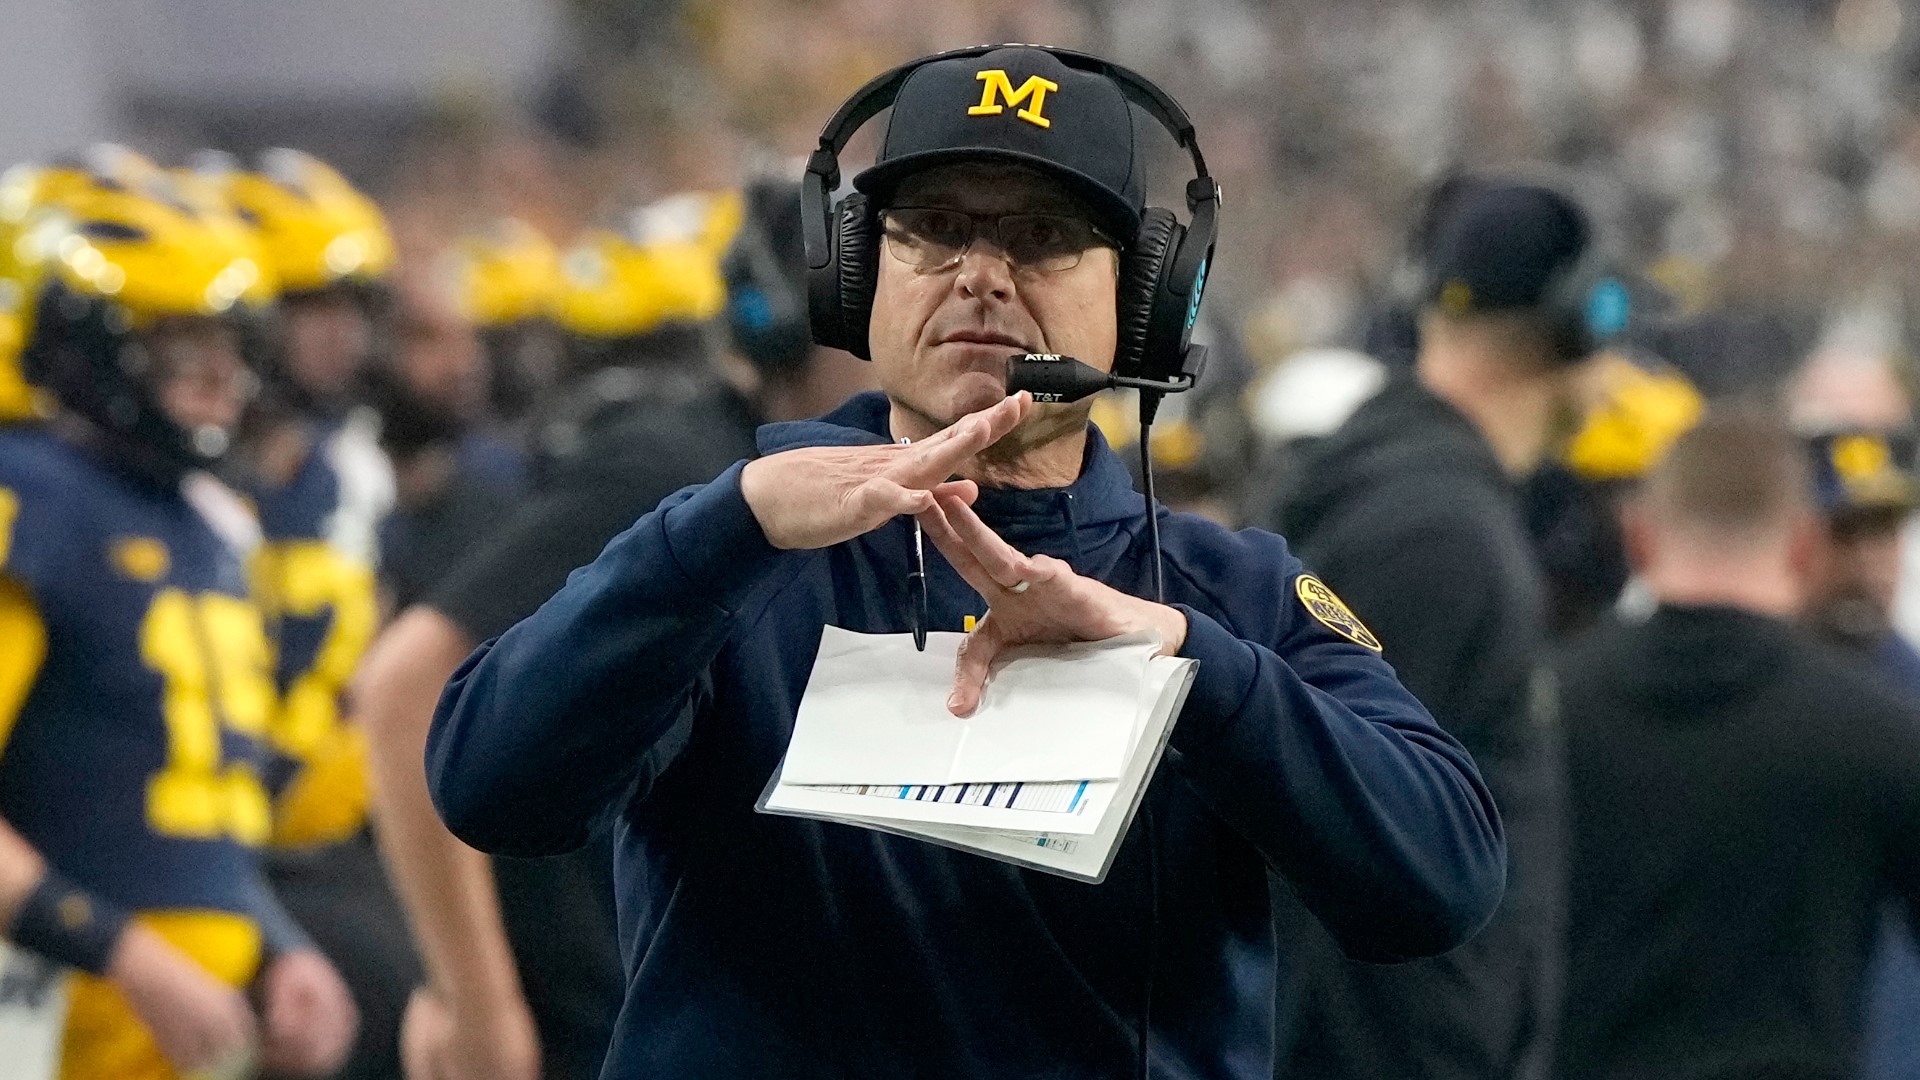 After much speculation if he'll return to the NFL, the Wolverines head coach will return to college football next season.